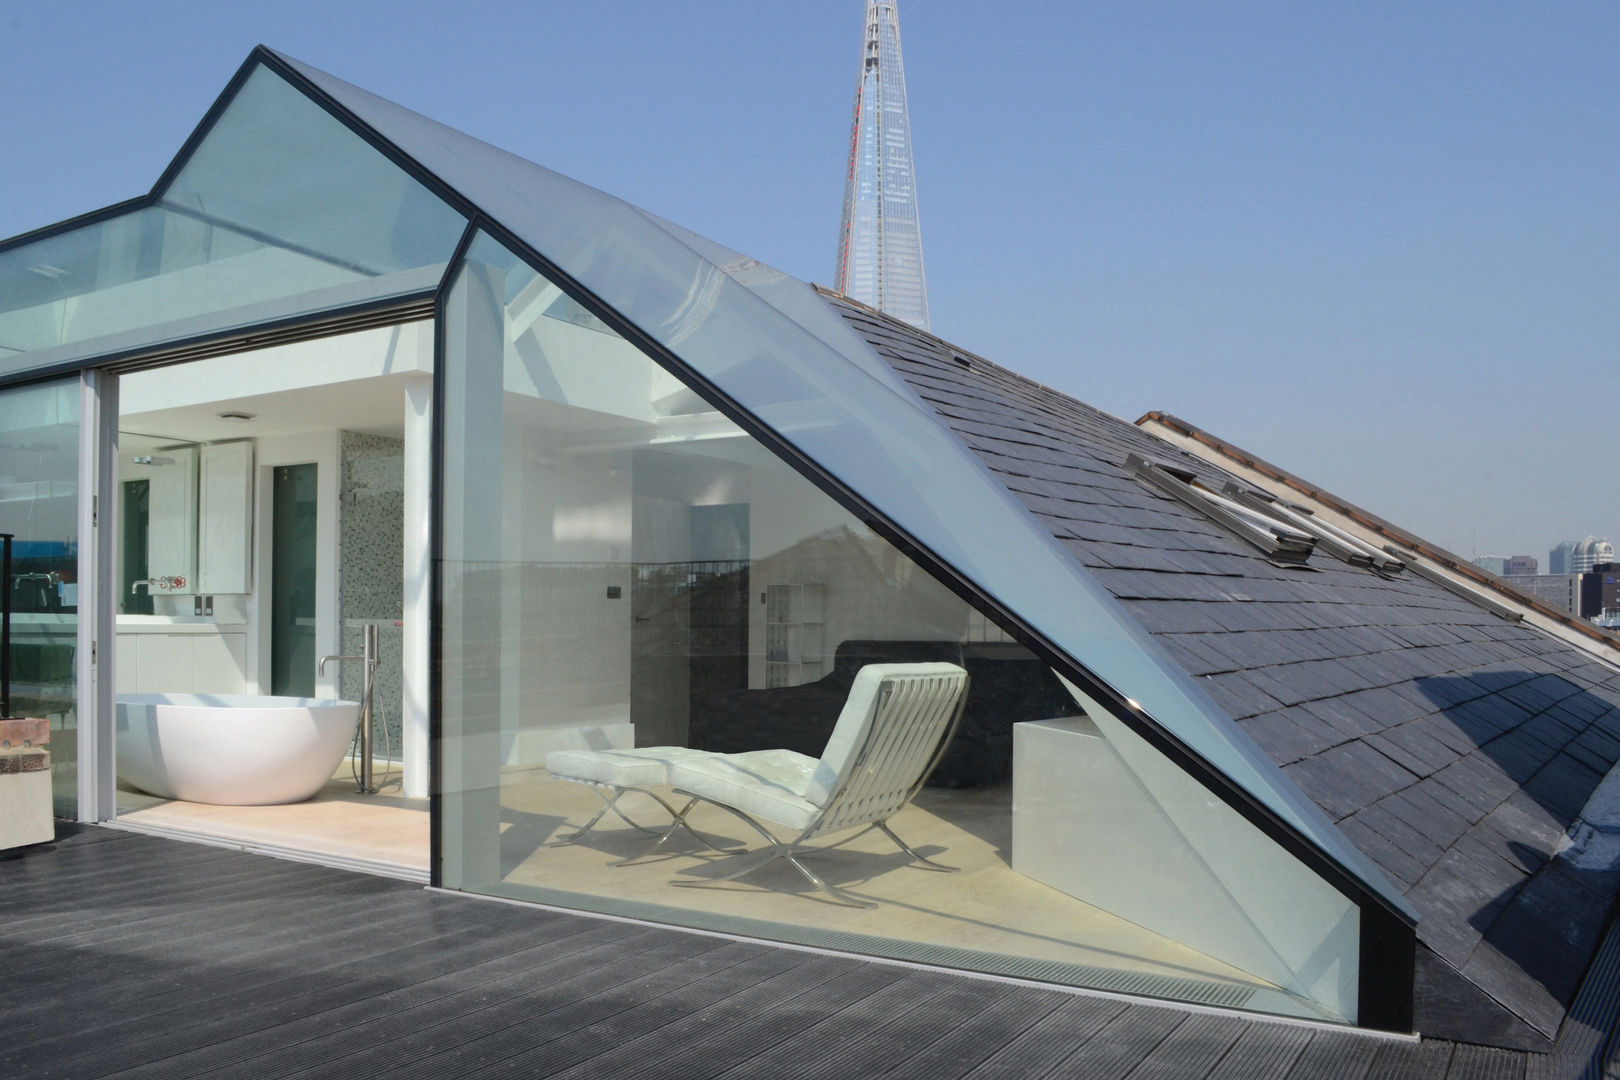 White Grounds Guarnieri Architects Roof terrace Glass extension,patio,roof,roof terrace,glass facade,pitched roof,conservatory